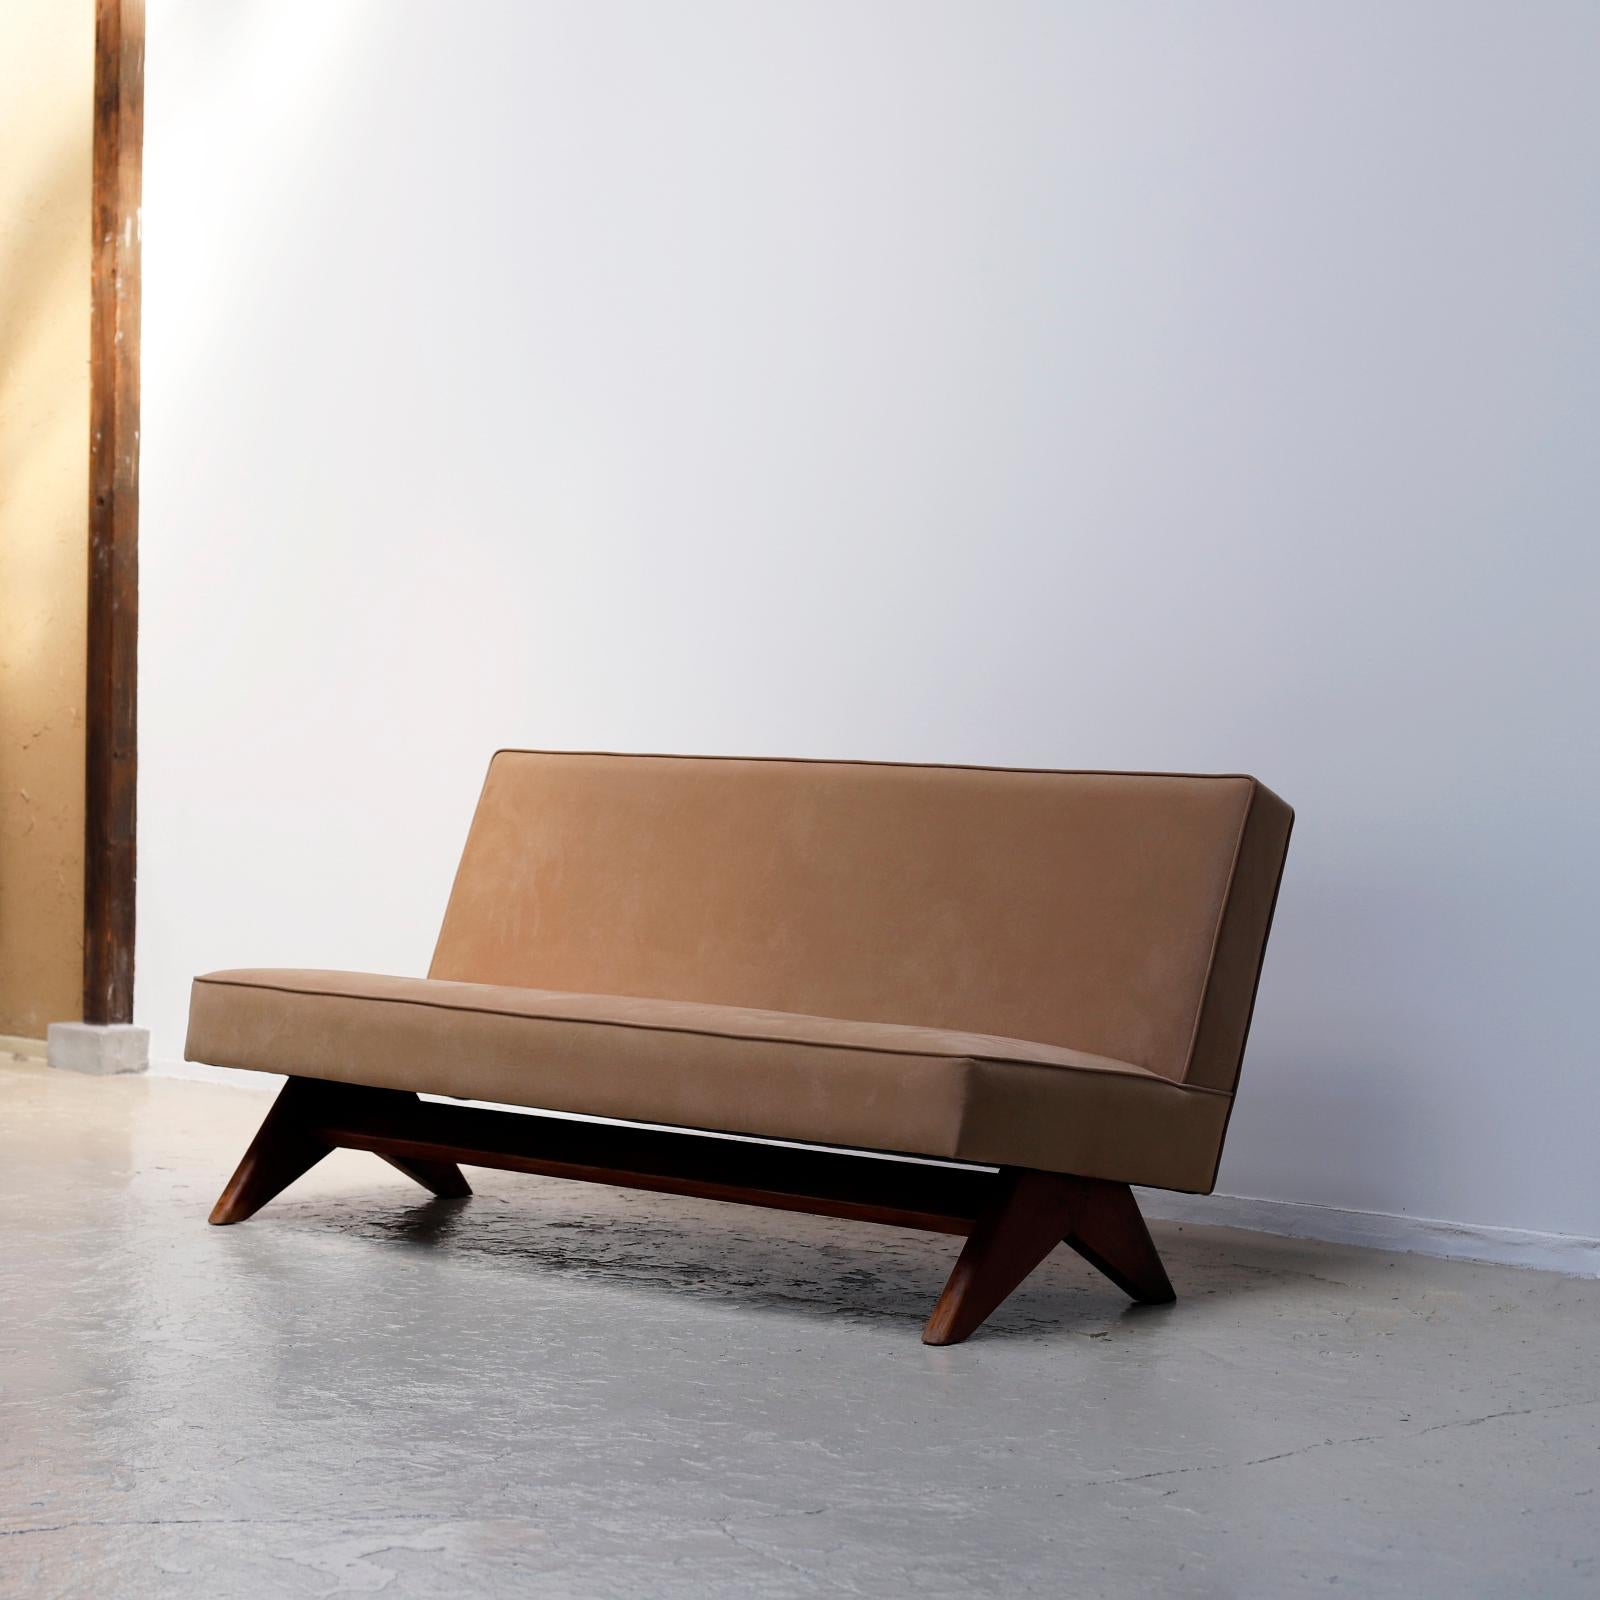 Indian Pierre Jeanneret Sofa from Chandigarh, India